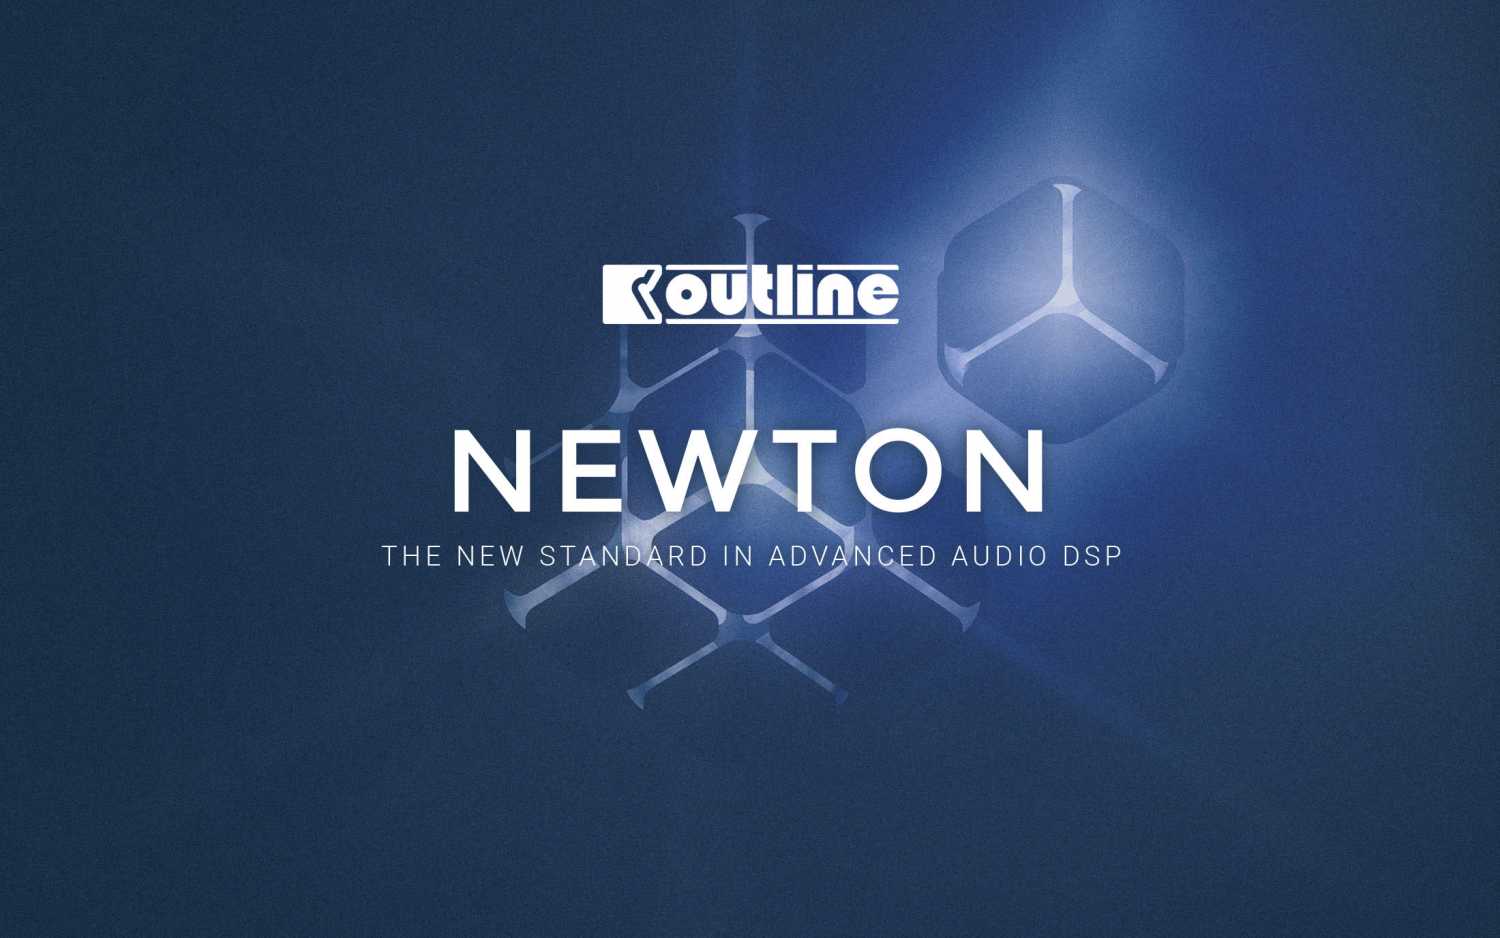 Newton will be available in three hardware versions with differing combinations of digital and analogue connections